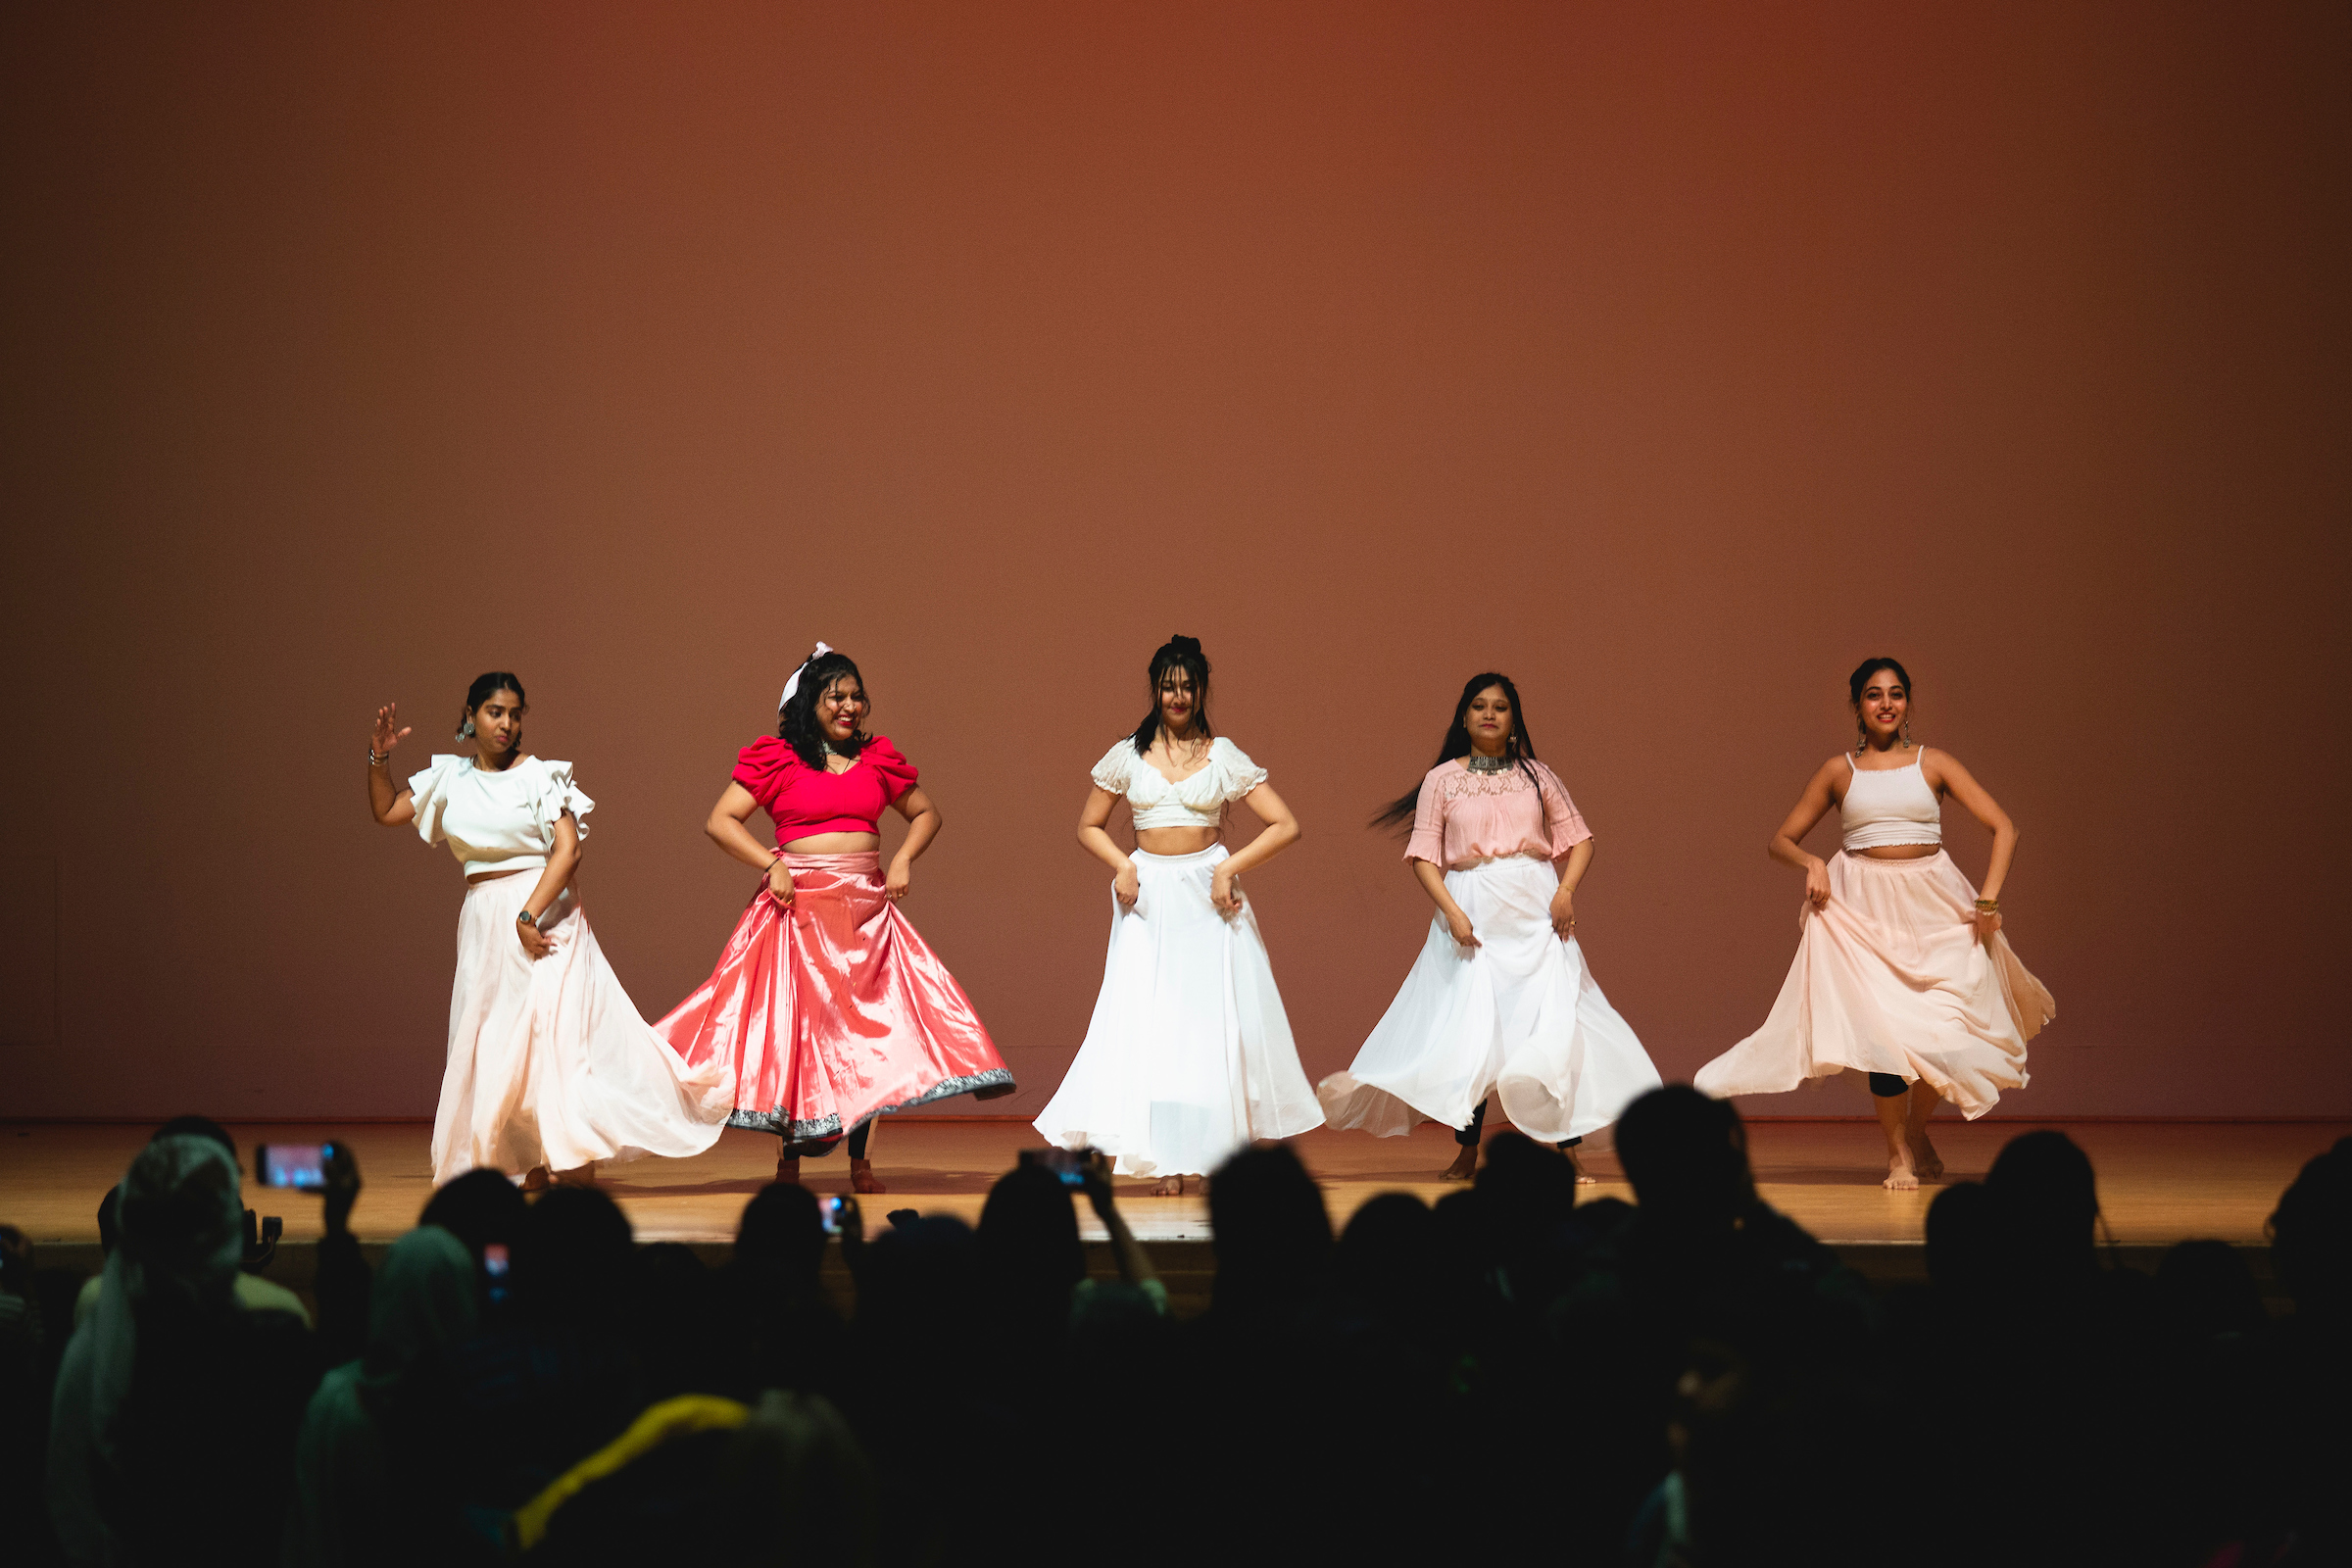 Group of five individuals on a stage dancing in red and white dresses